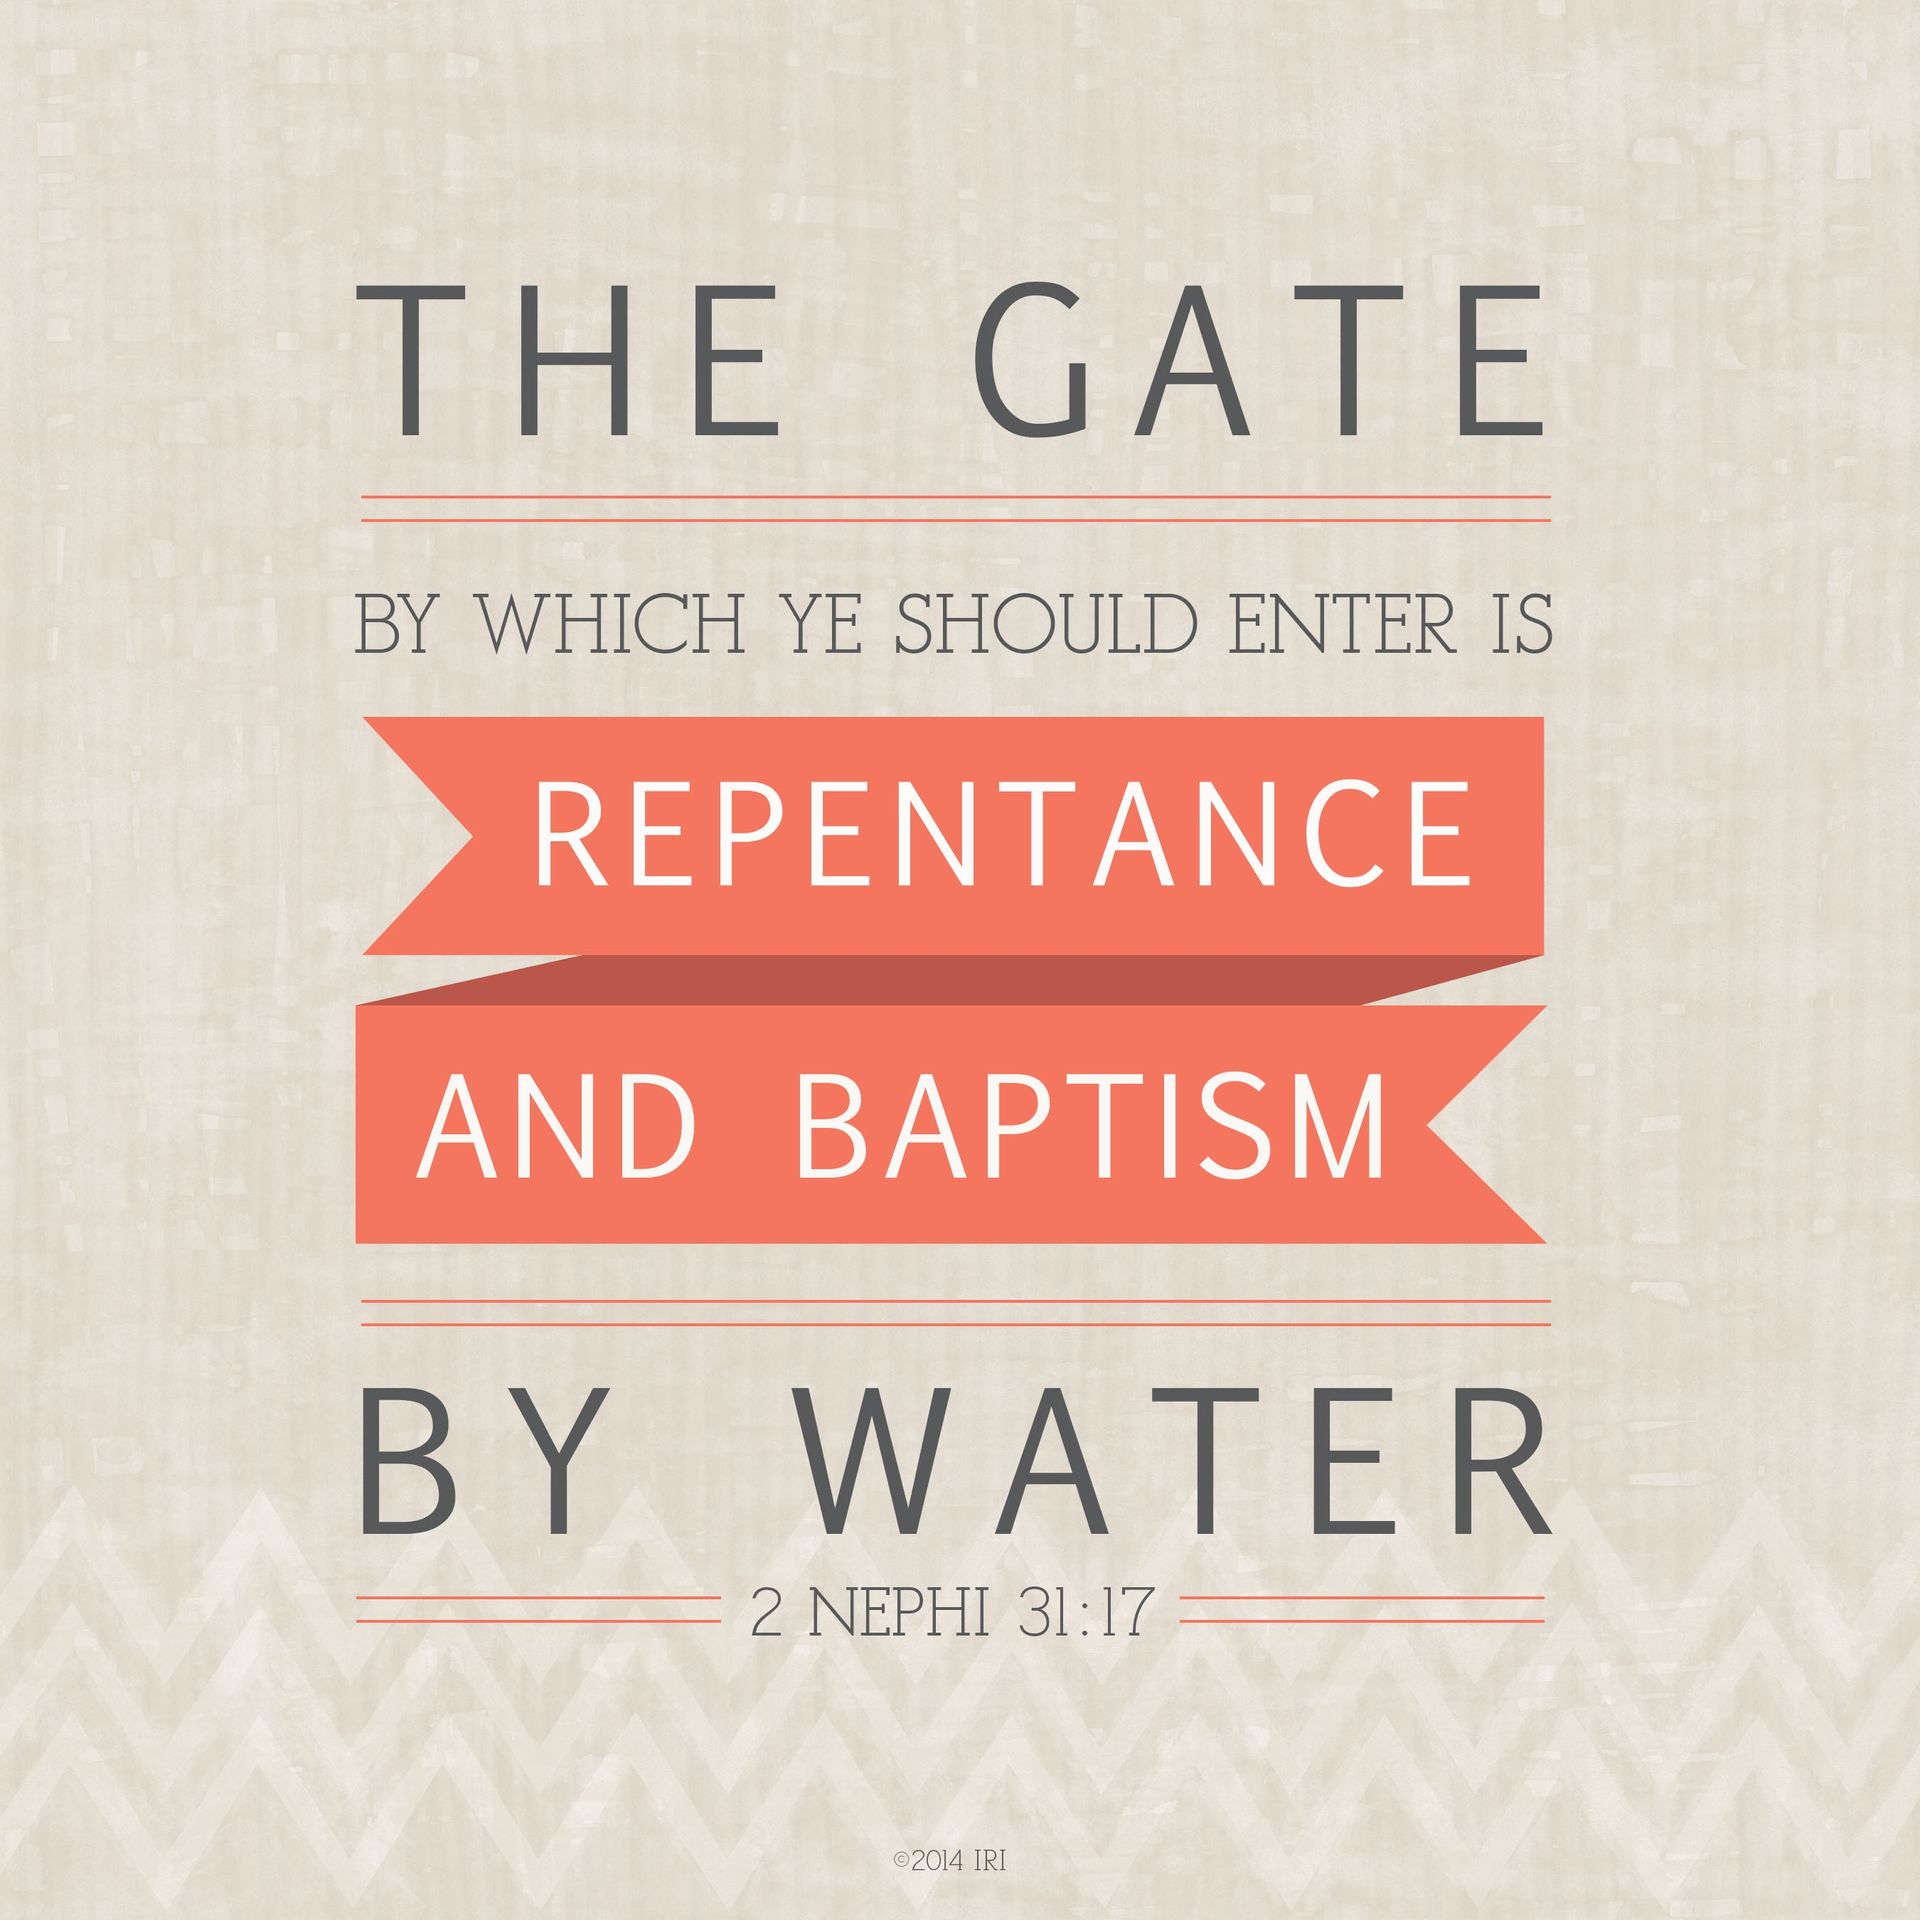 “The gate by which ye should enter is repentance and baptism by water.”—2 Nephi 31:17.